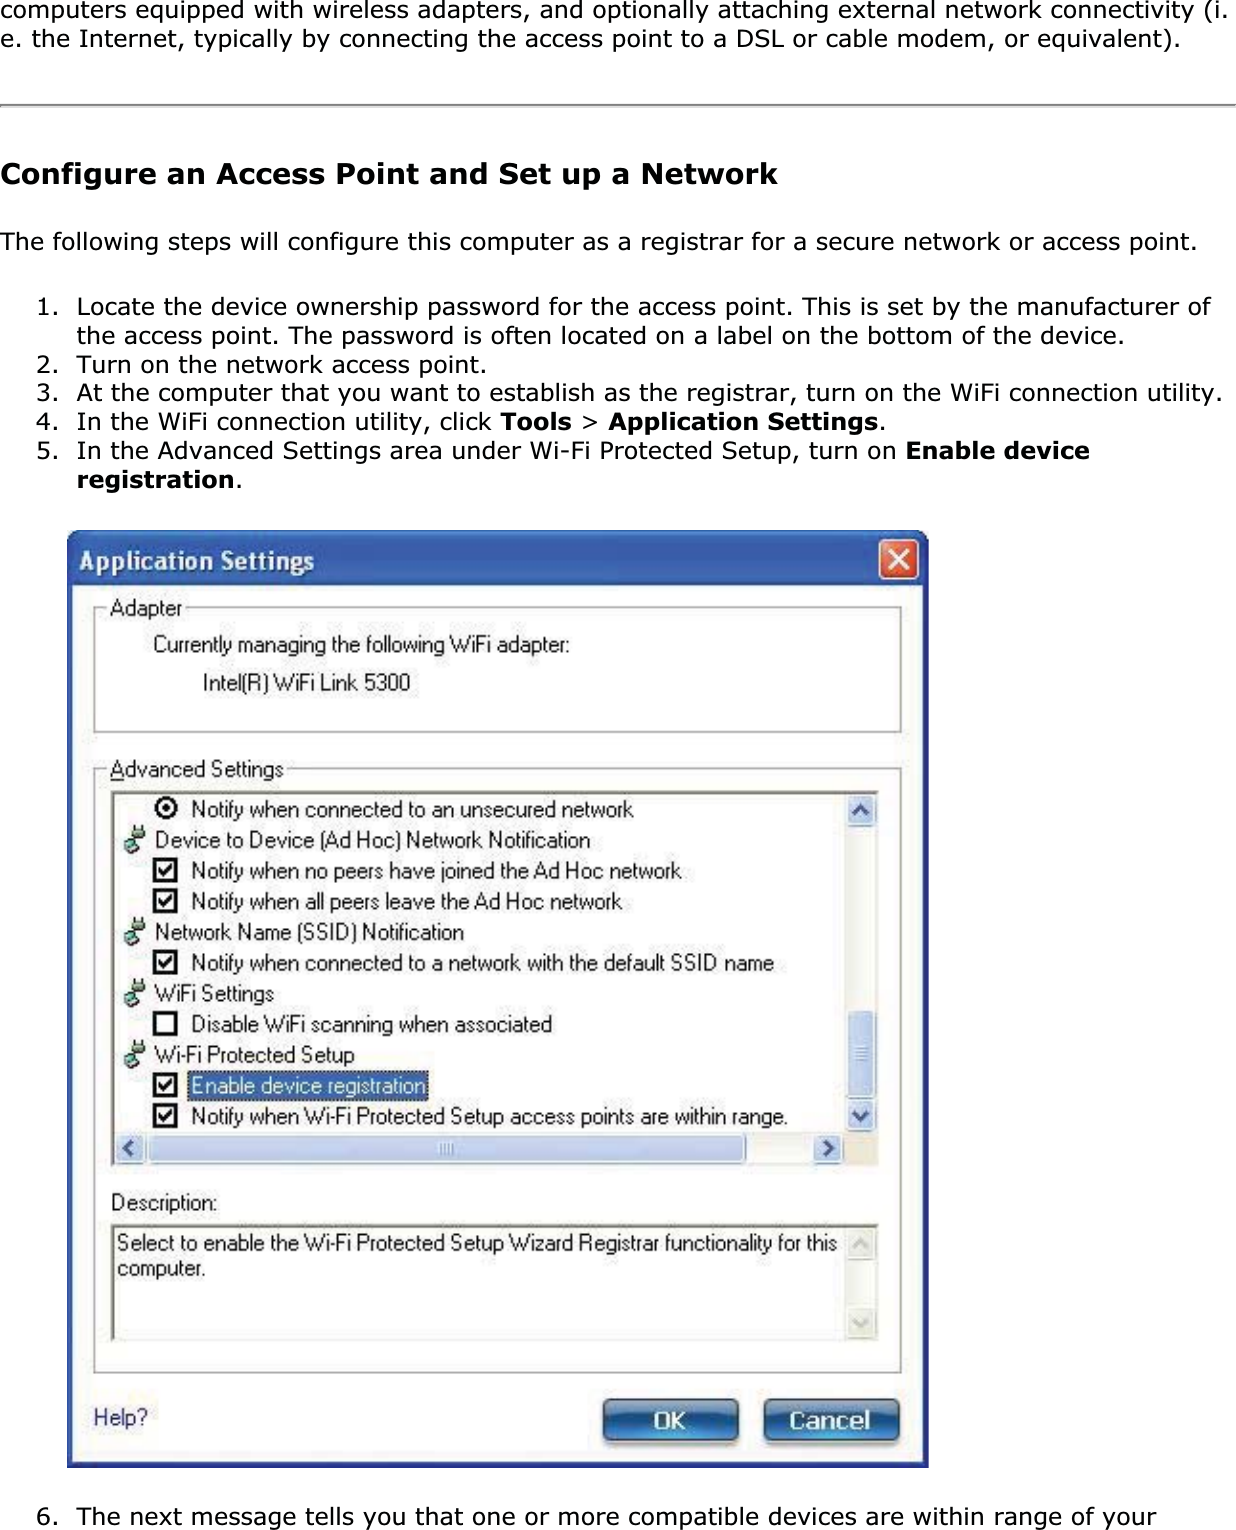 computers equipped with wireless adapters, and optionally attaching external network connectivity (i.e. the Internet, typically by connecting the access point to a DSL or cable modem, or equivalent).Configure an Access Point and Set up a NetworkThe following steps will configure this computer as a registrar for a secure network or access point.1. Locate the device ownership password for the access point. This is set by the manufacturer of the access point. The password is often located on a label on the bottom of the device.2. Turn on the network access point.3. At the computer that you want to establish as the registrar, turn on the WiFi connection utility.4. In the WiFi connection utility, click Tools &gt; Application Settings.5. In the Advanced Settings area under Wi-Fi Protected Setup, turn on Enable device registration.6. The next message tells you that one or more compatible devices are within range of your 